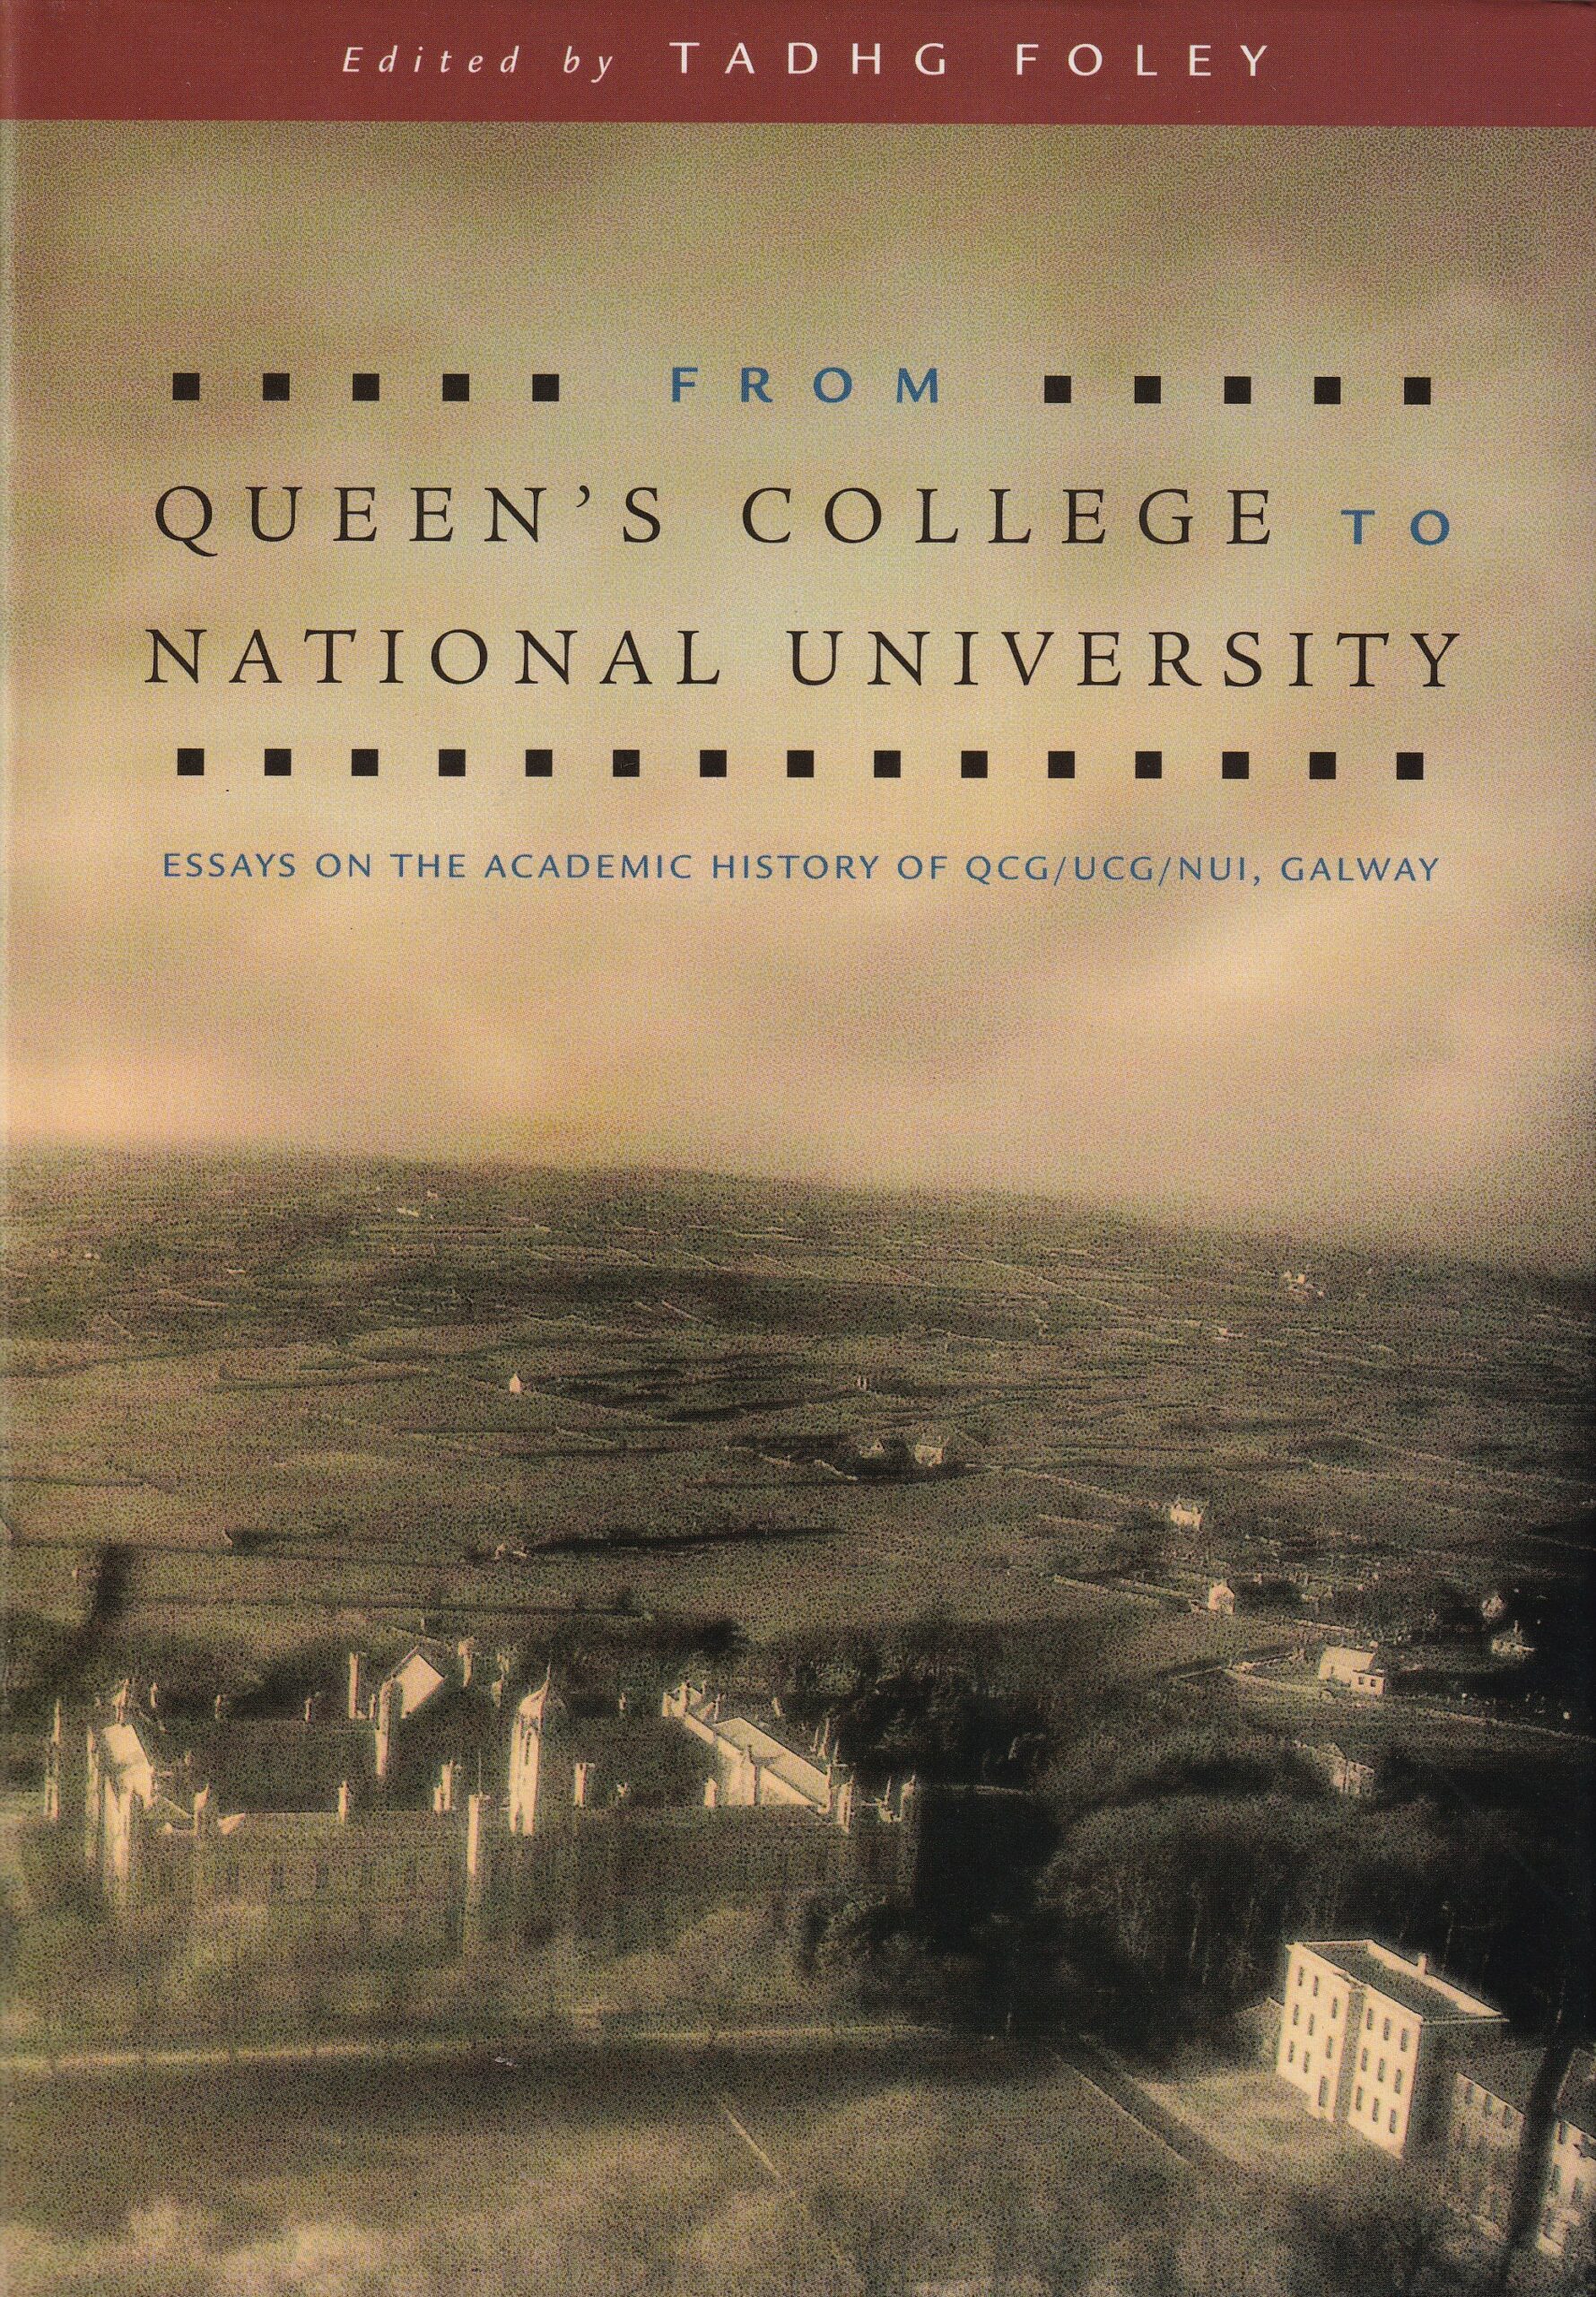 From Queen’s College to National University: Essays on the Academic History of QCG/UCG/NUI, Galway by Tadhg Foley